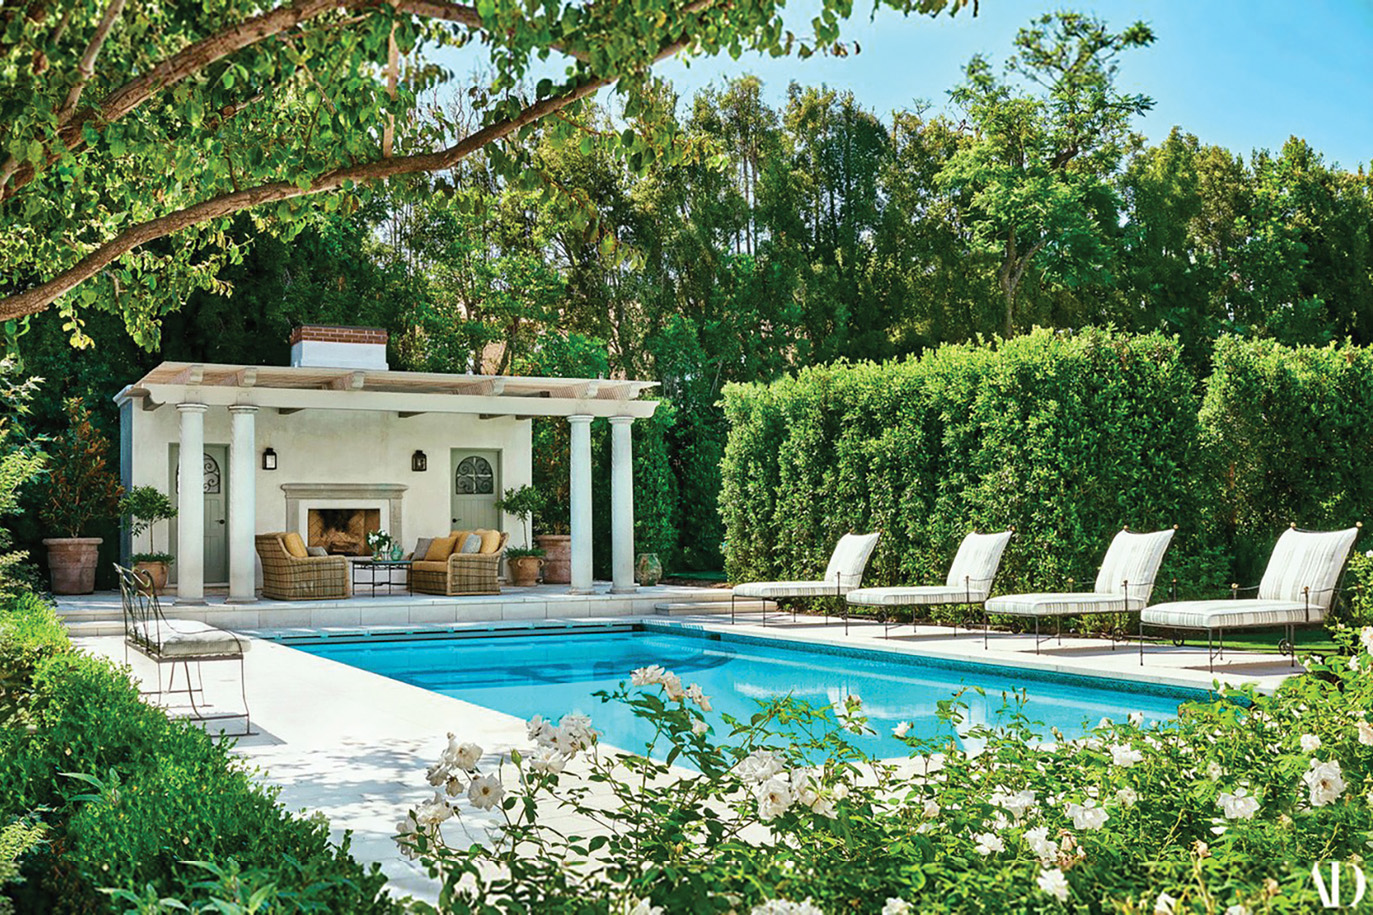 Italianate Villa Luxury Outdoor Living Estate Renovation by HartmanBaldwin Photo by Architectural Digest